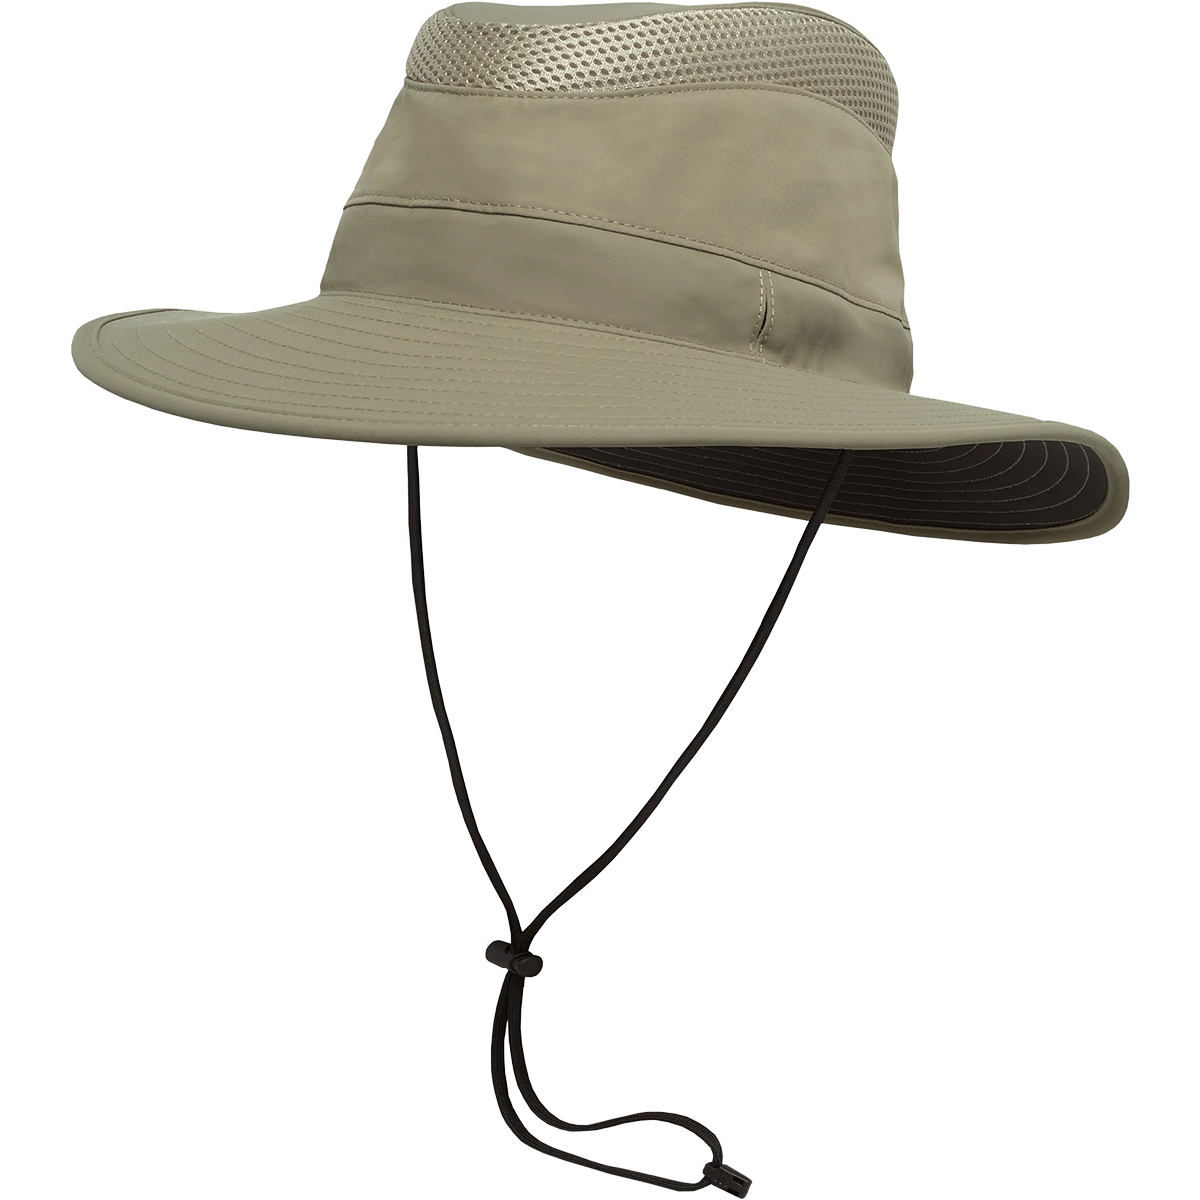 Outdoor Research - Sombriolet Sun Hat - XL - Sand